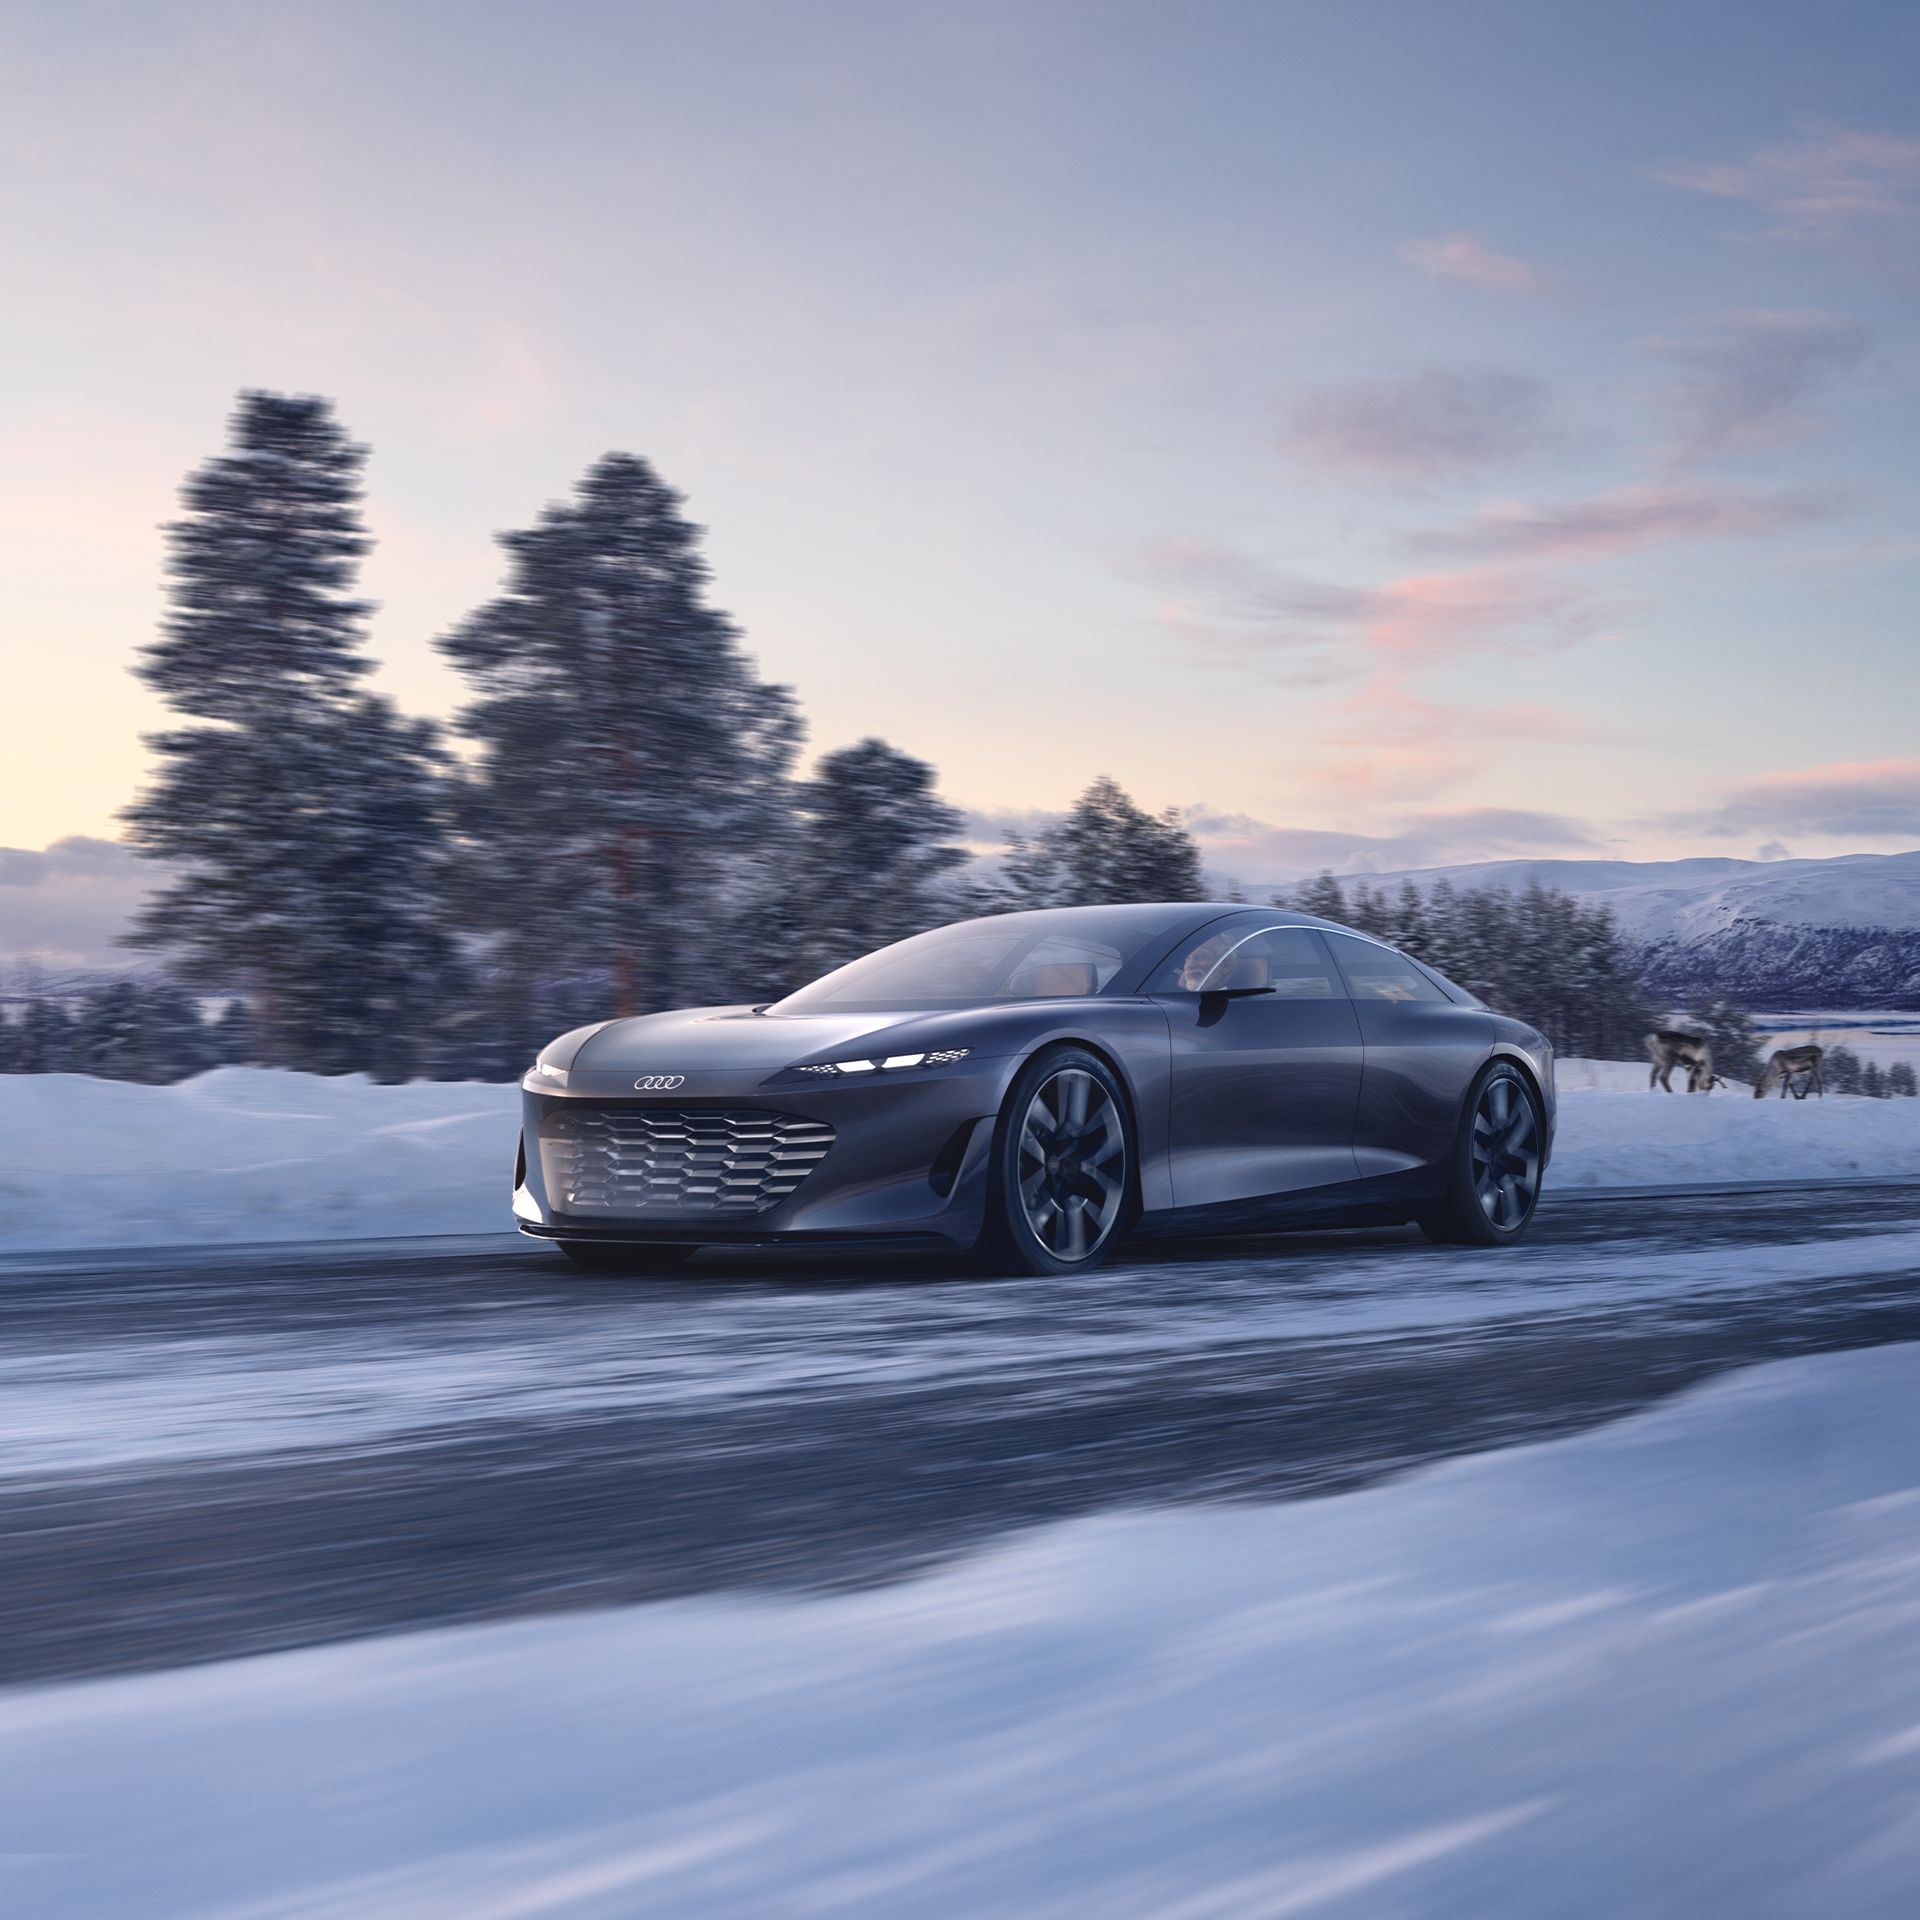 The Audi grandsphere concept on a snowy road.